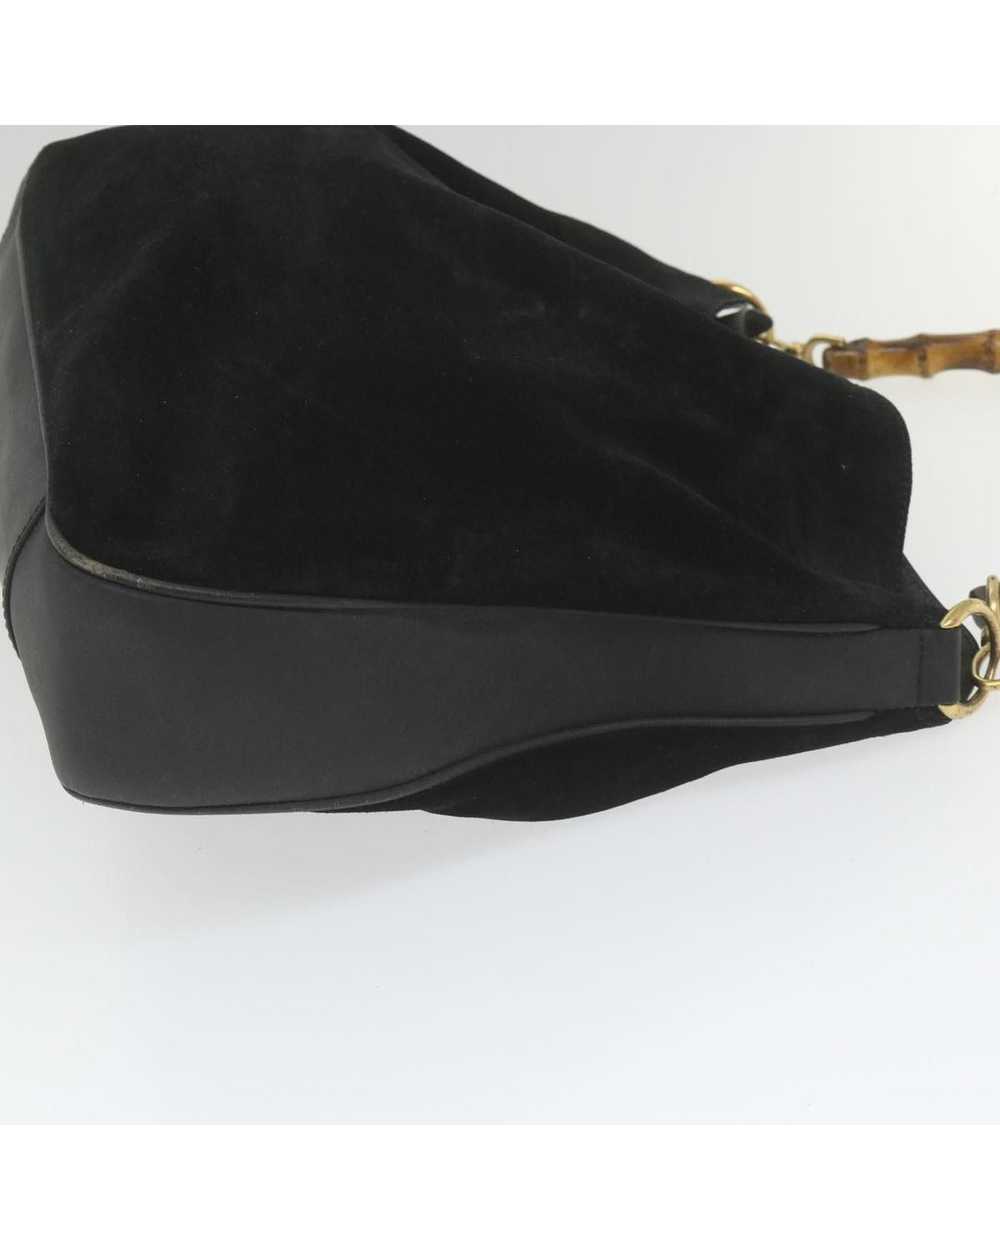 Gucci Black Suede Shoulder Bag with Bamboo Handle - image 4